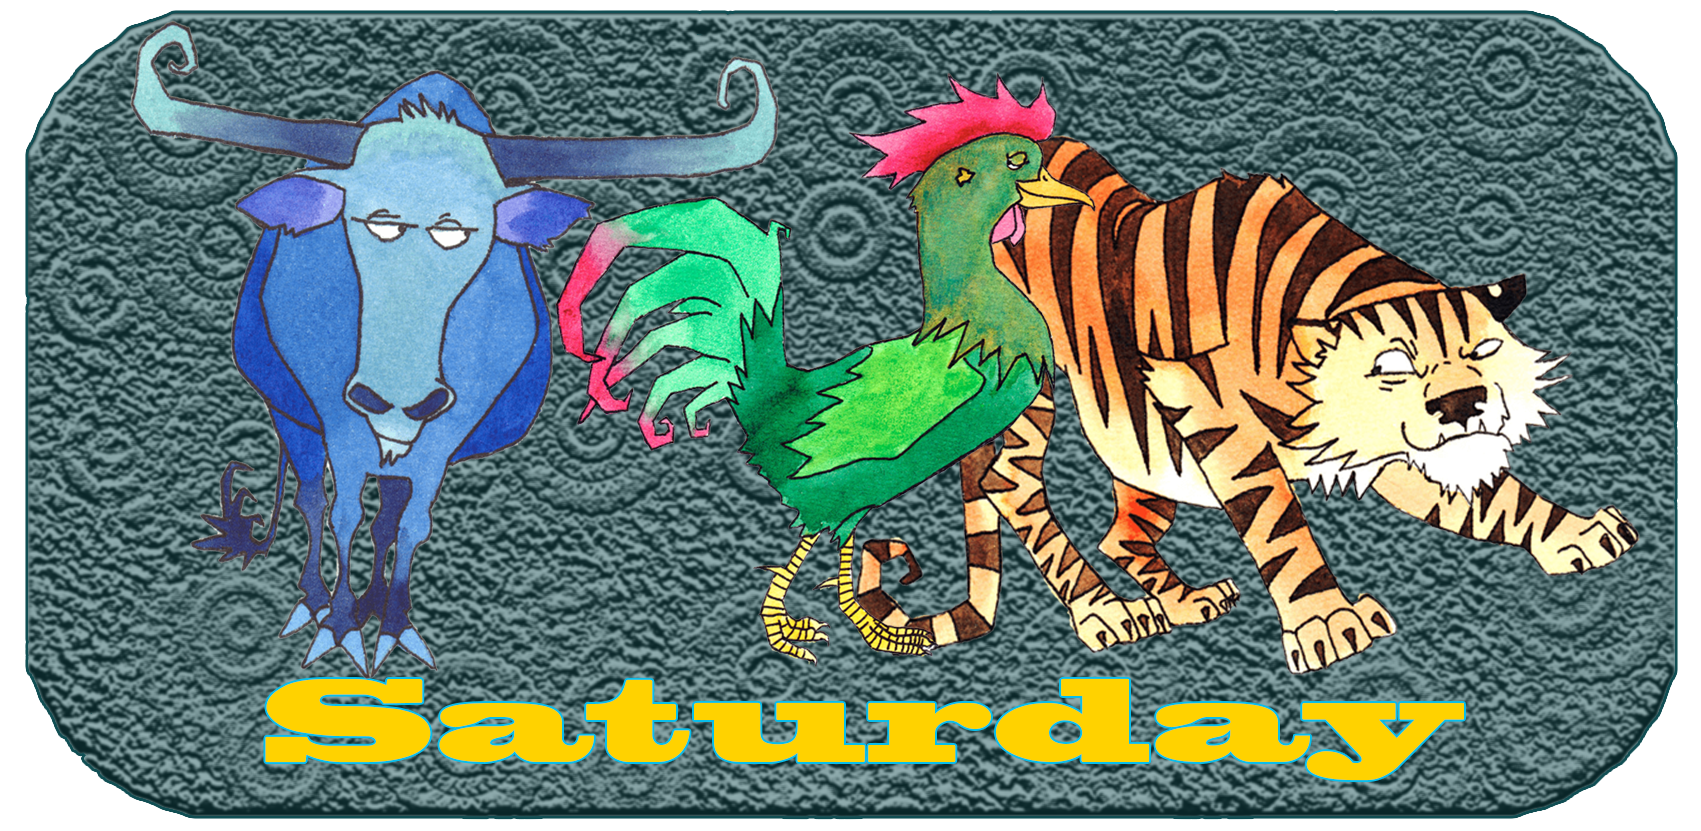 Chinese animal | Days of the week | Saturday | Ox, Rooster, Tiger